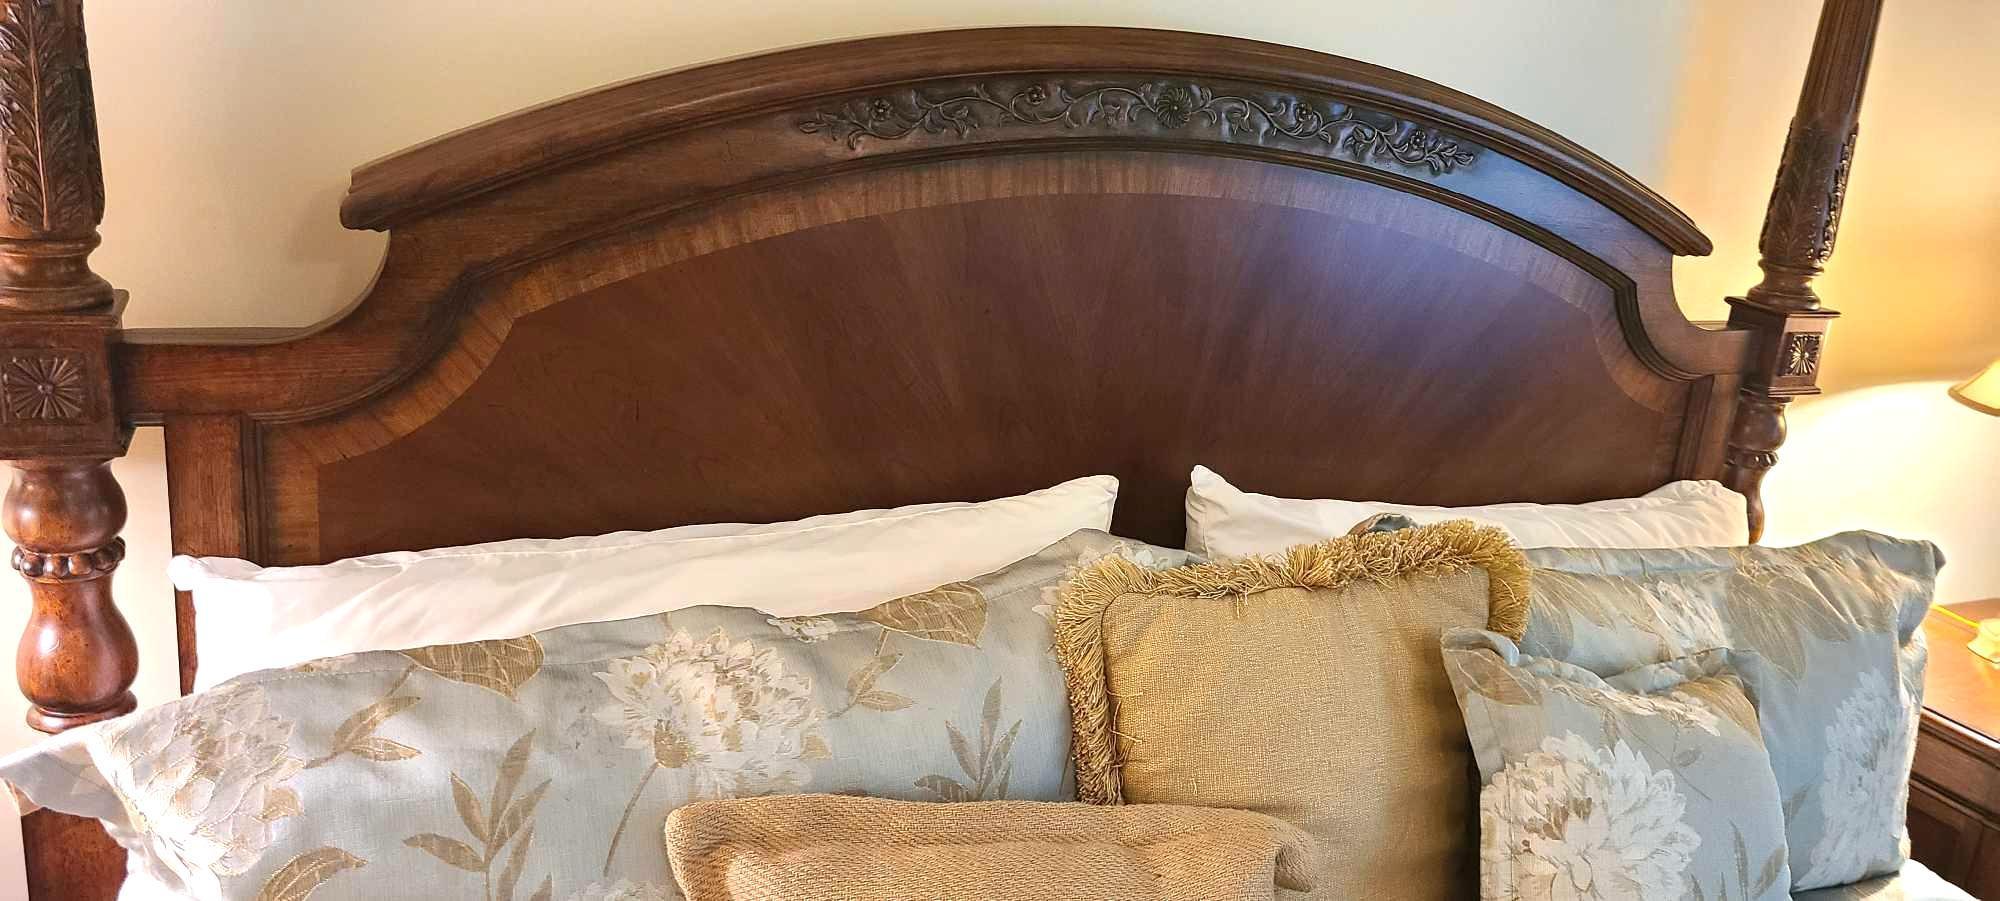 4 Post Cherry Bed $50 STS